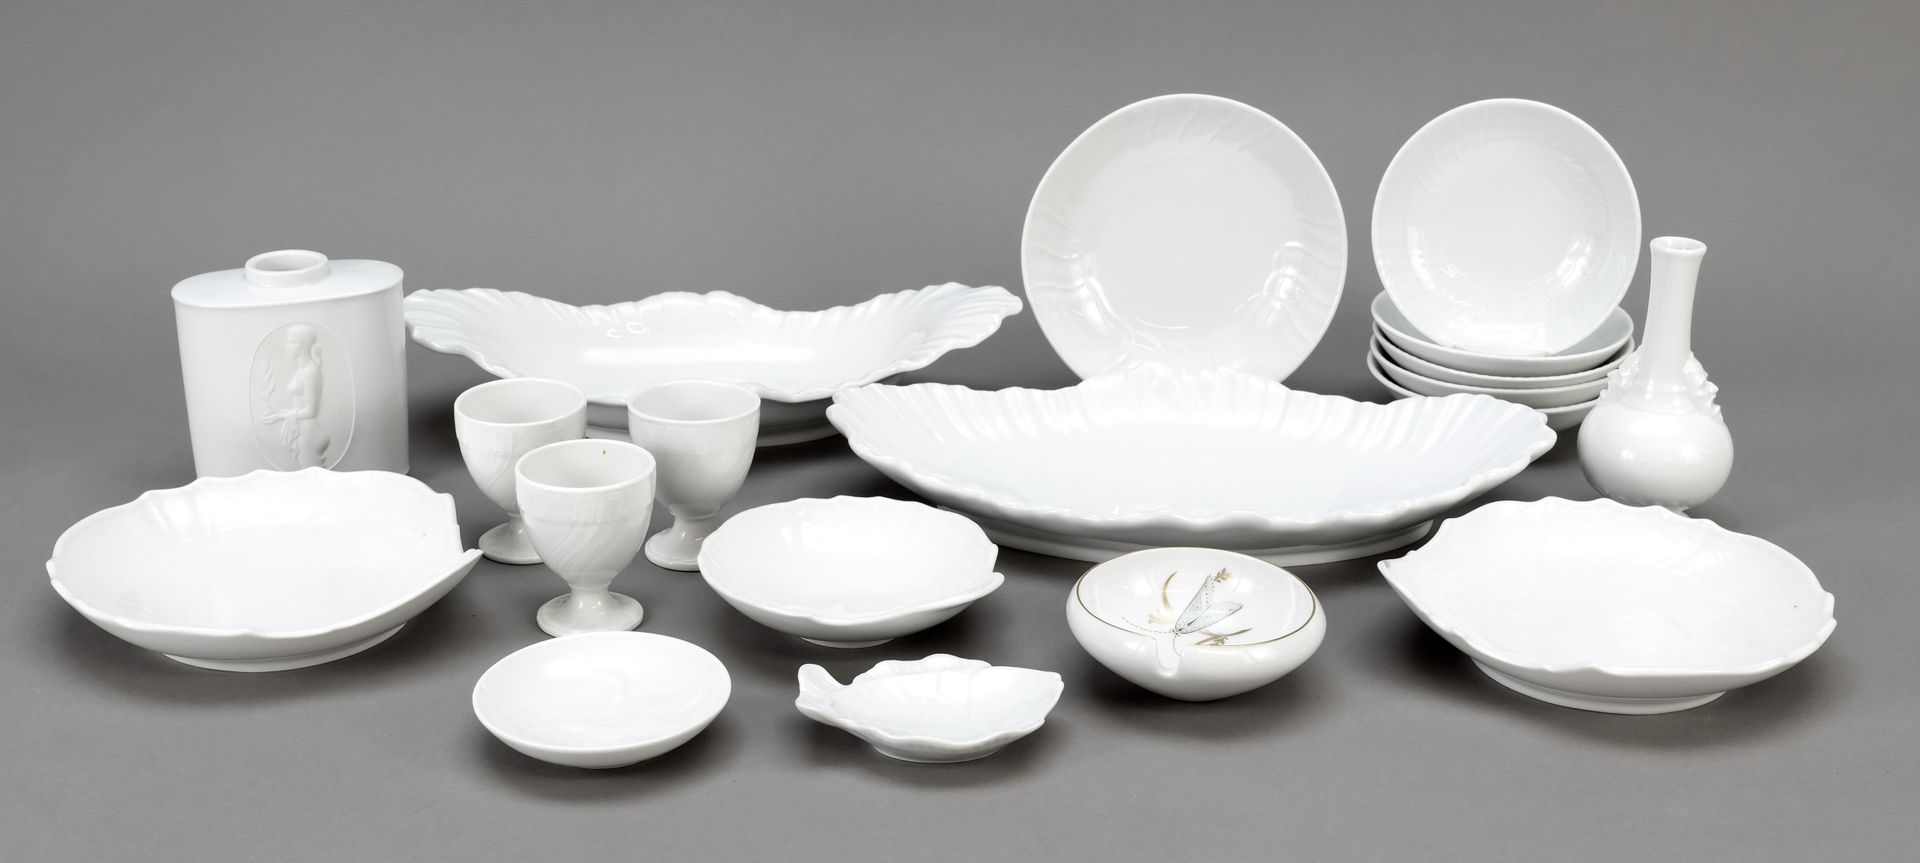 Null Mixed lot, 19 pieces, KPM Berlin, end of 20th century, 2nd choice, white, v&hellip;